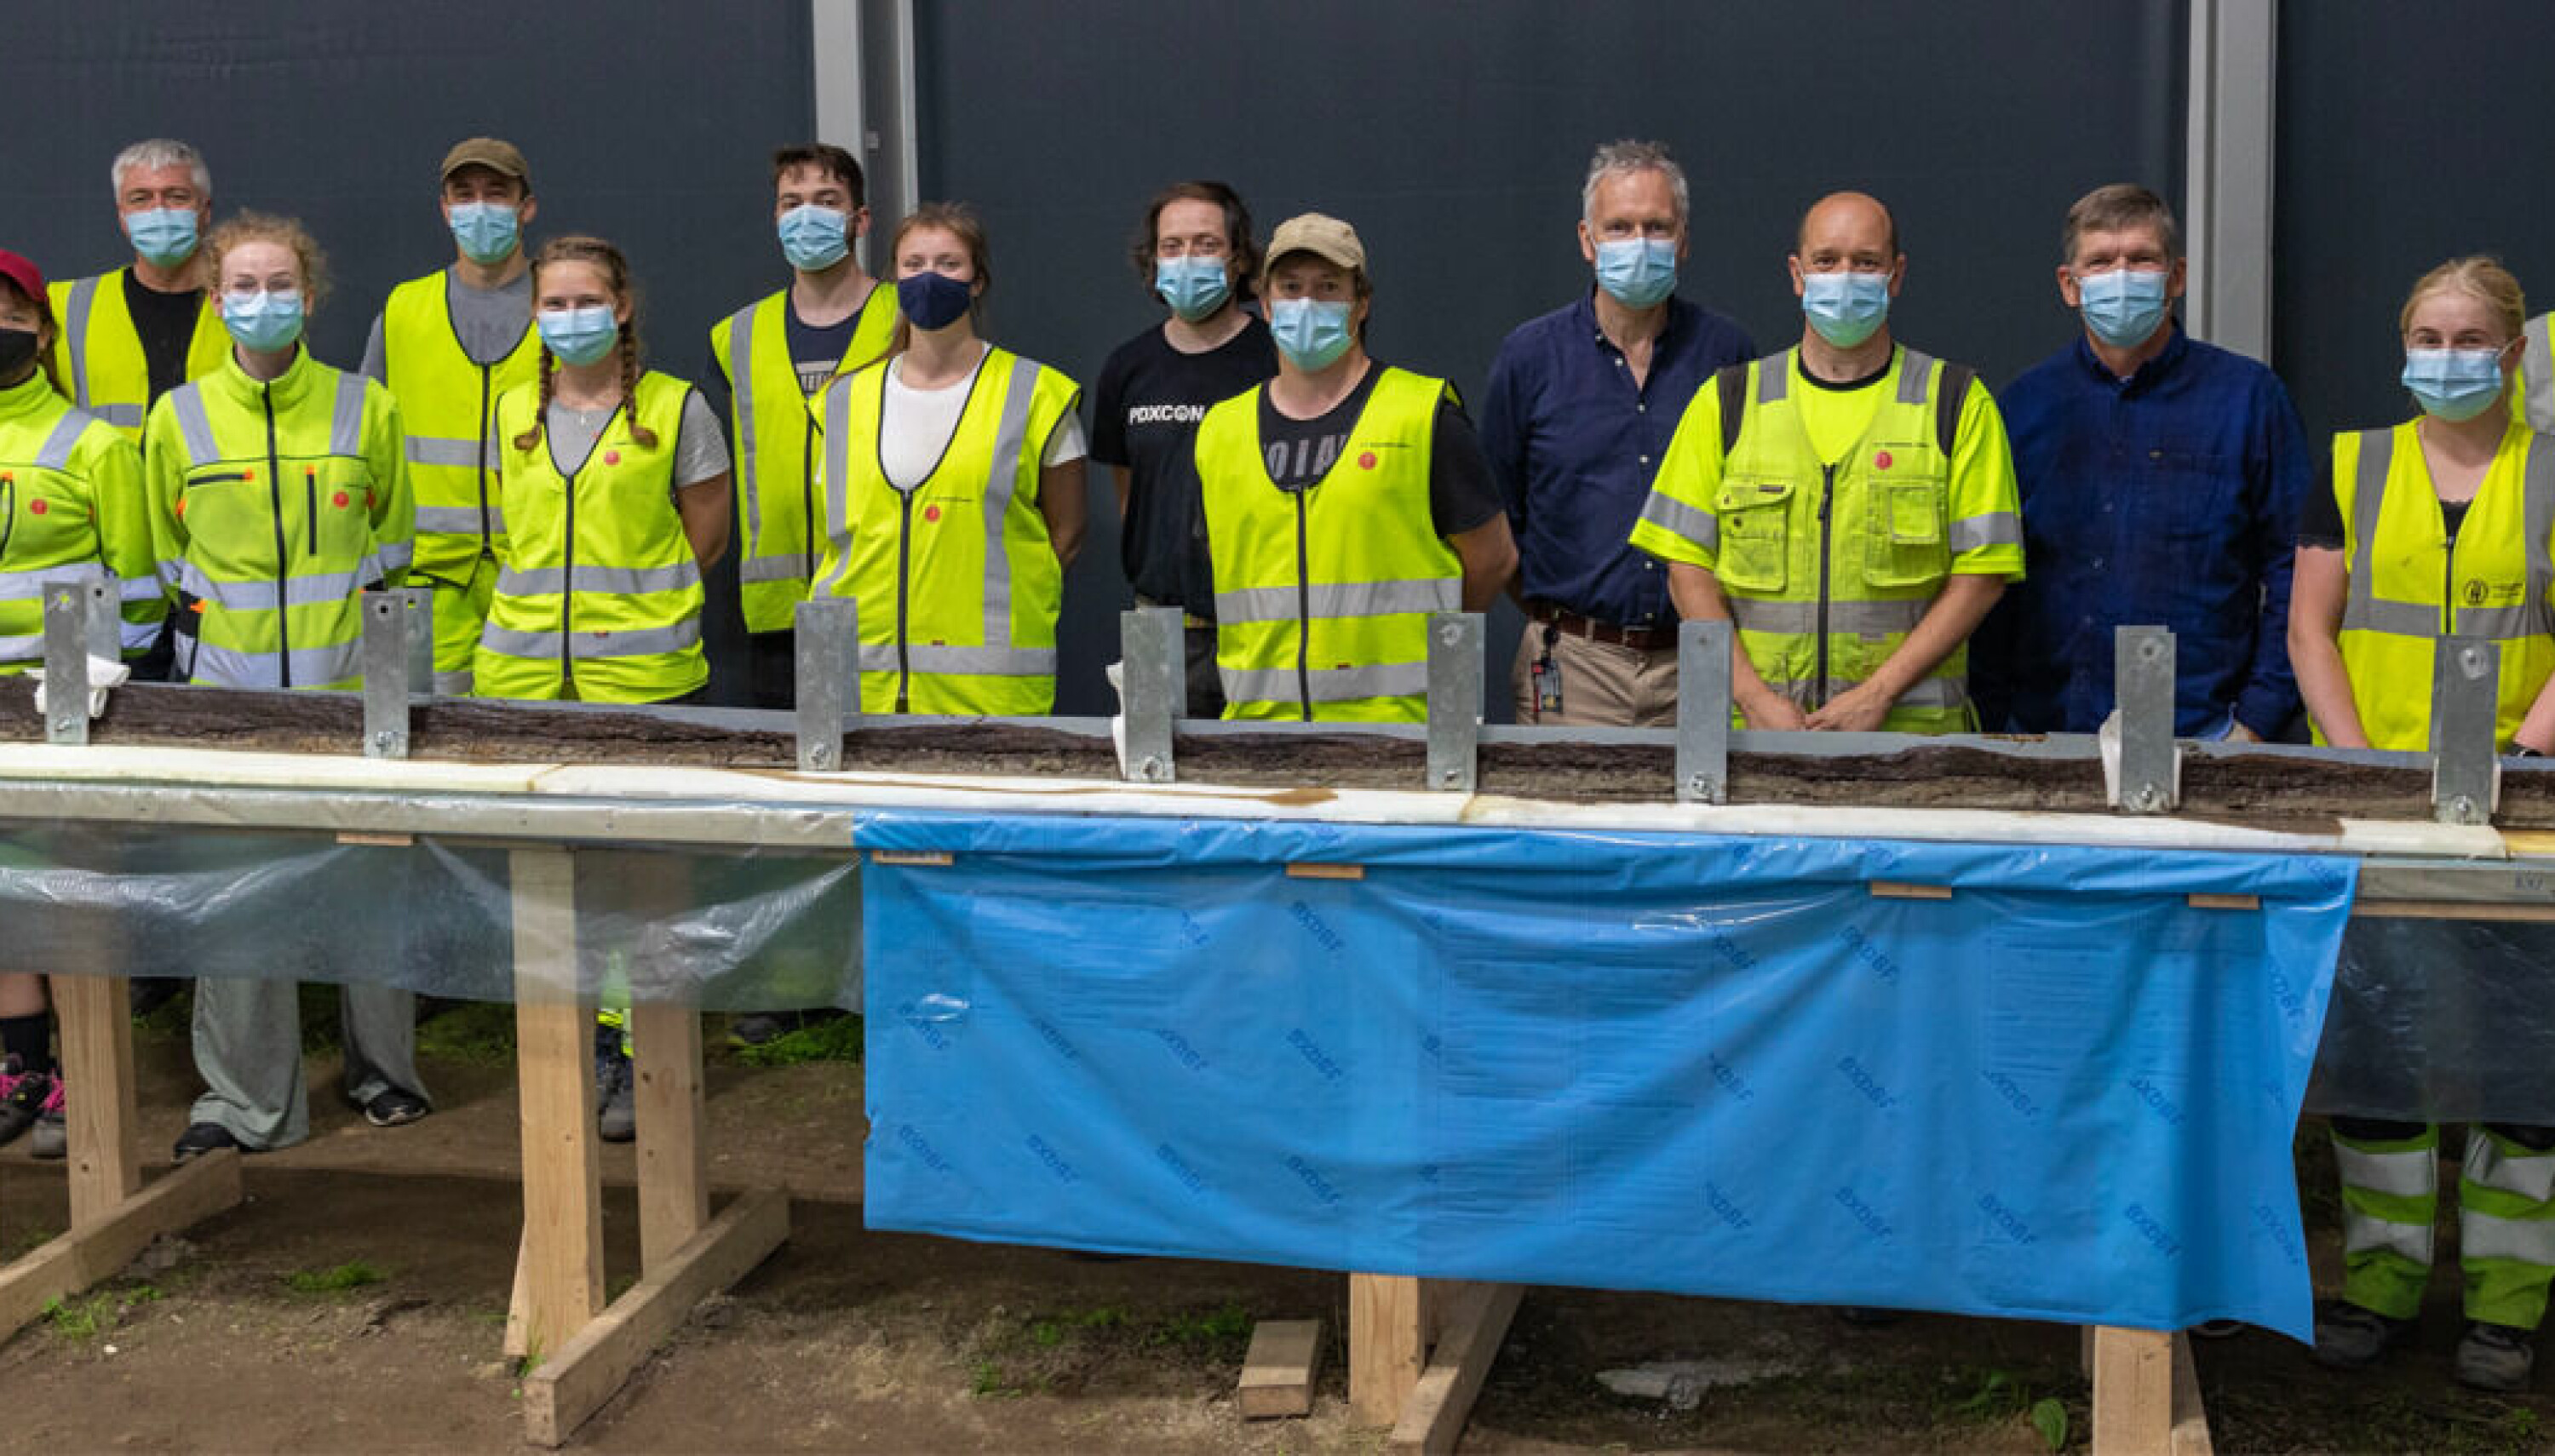 Team Gjellestad and the longest piece of keel. Project manager Christian Løchsen Rødsrud is the third person counting from the right hand side.